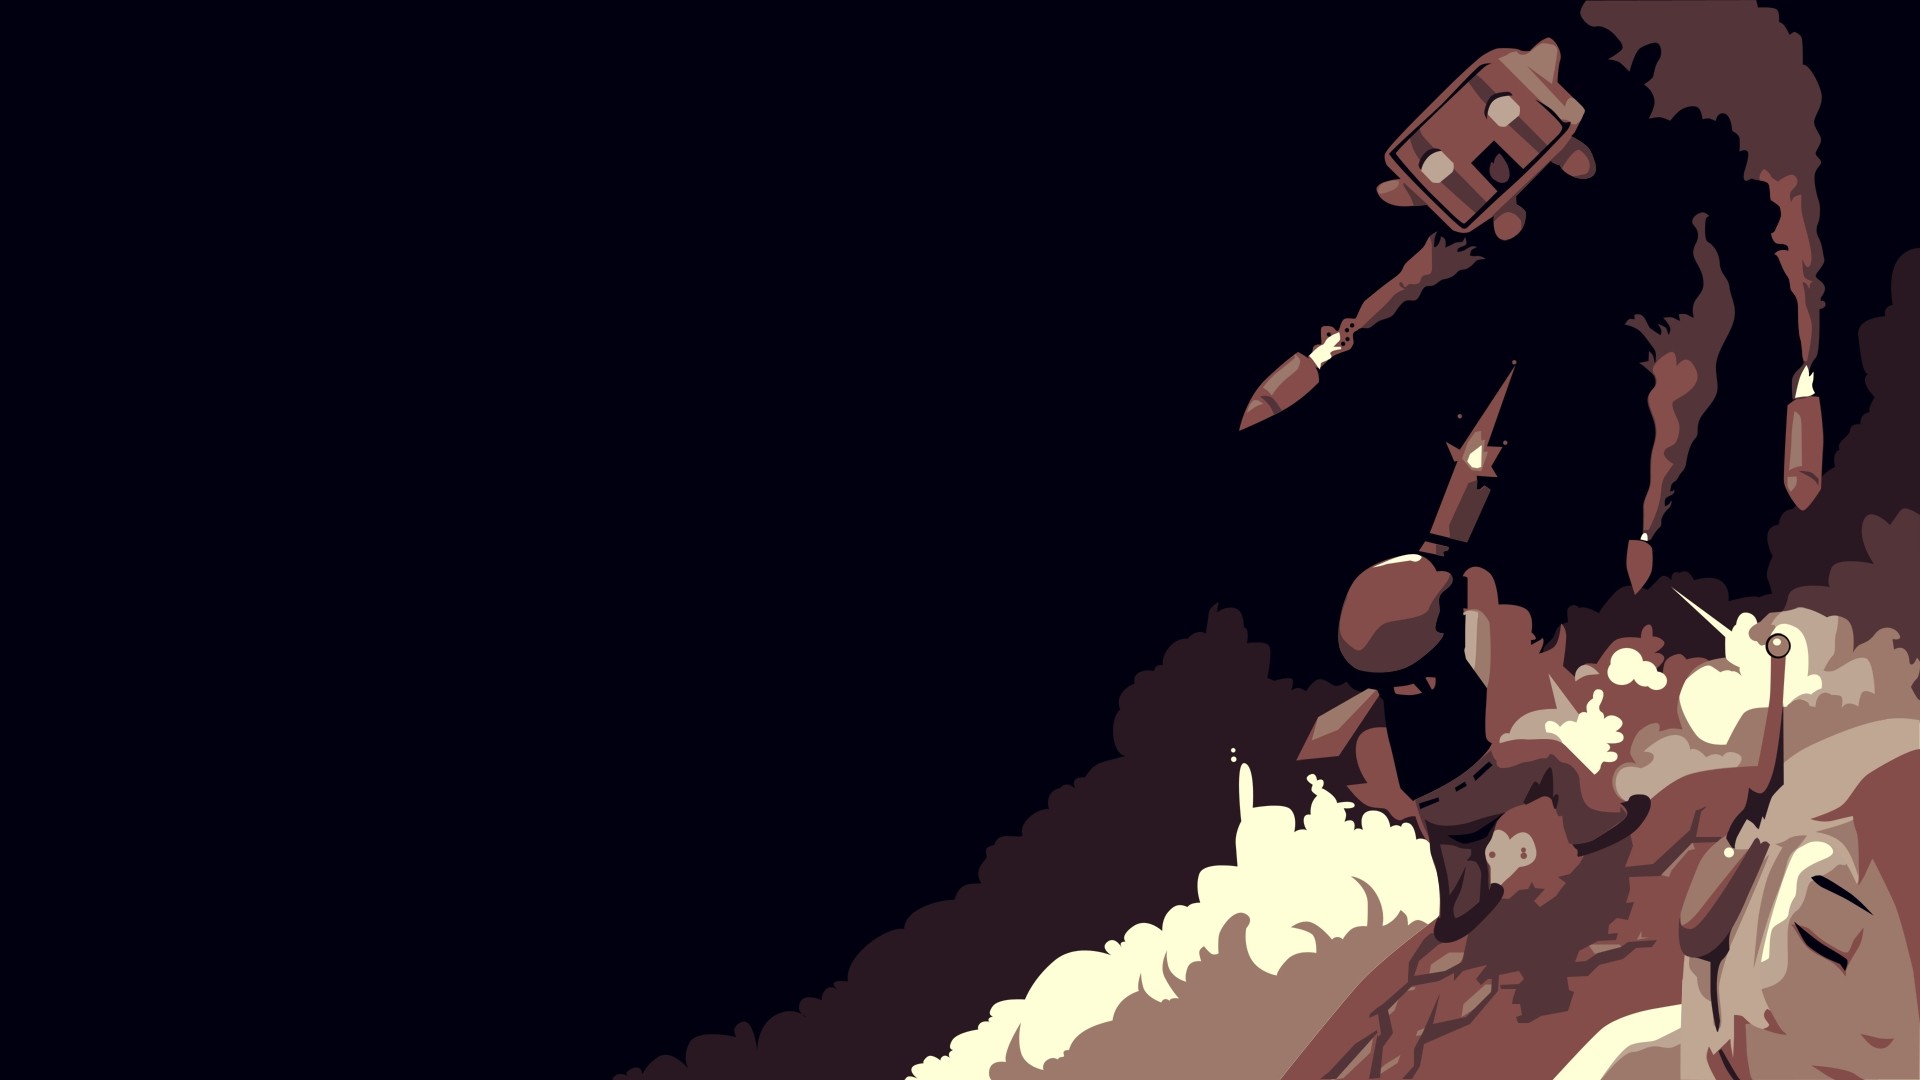 General 1920x1080 minimalism cave story artwork video games simple background video game art